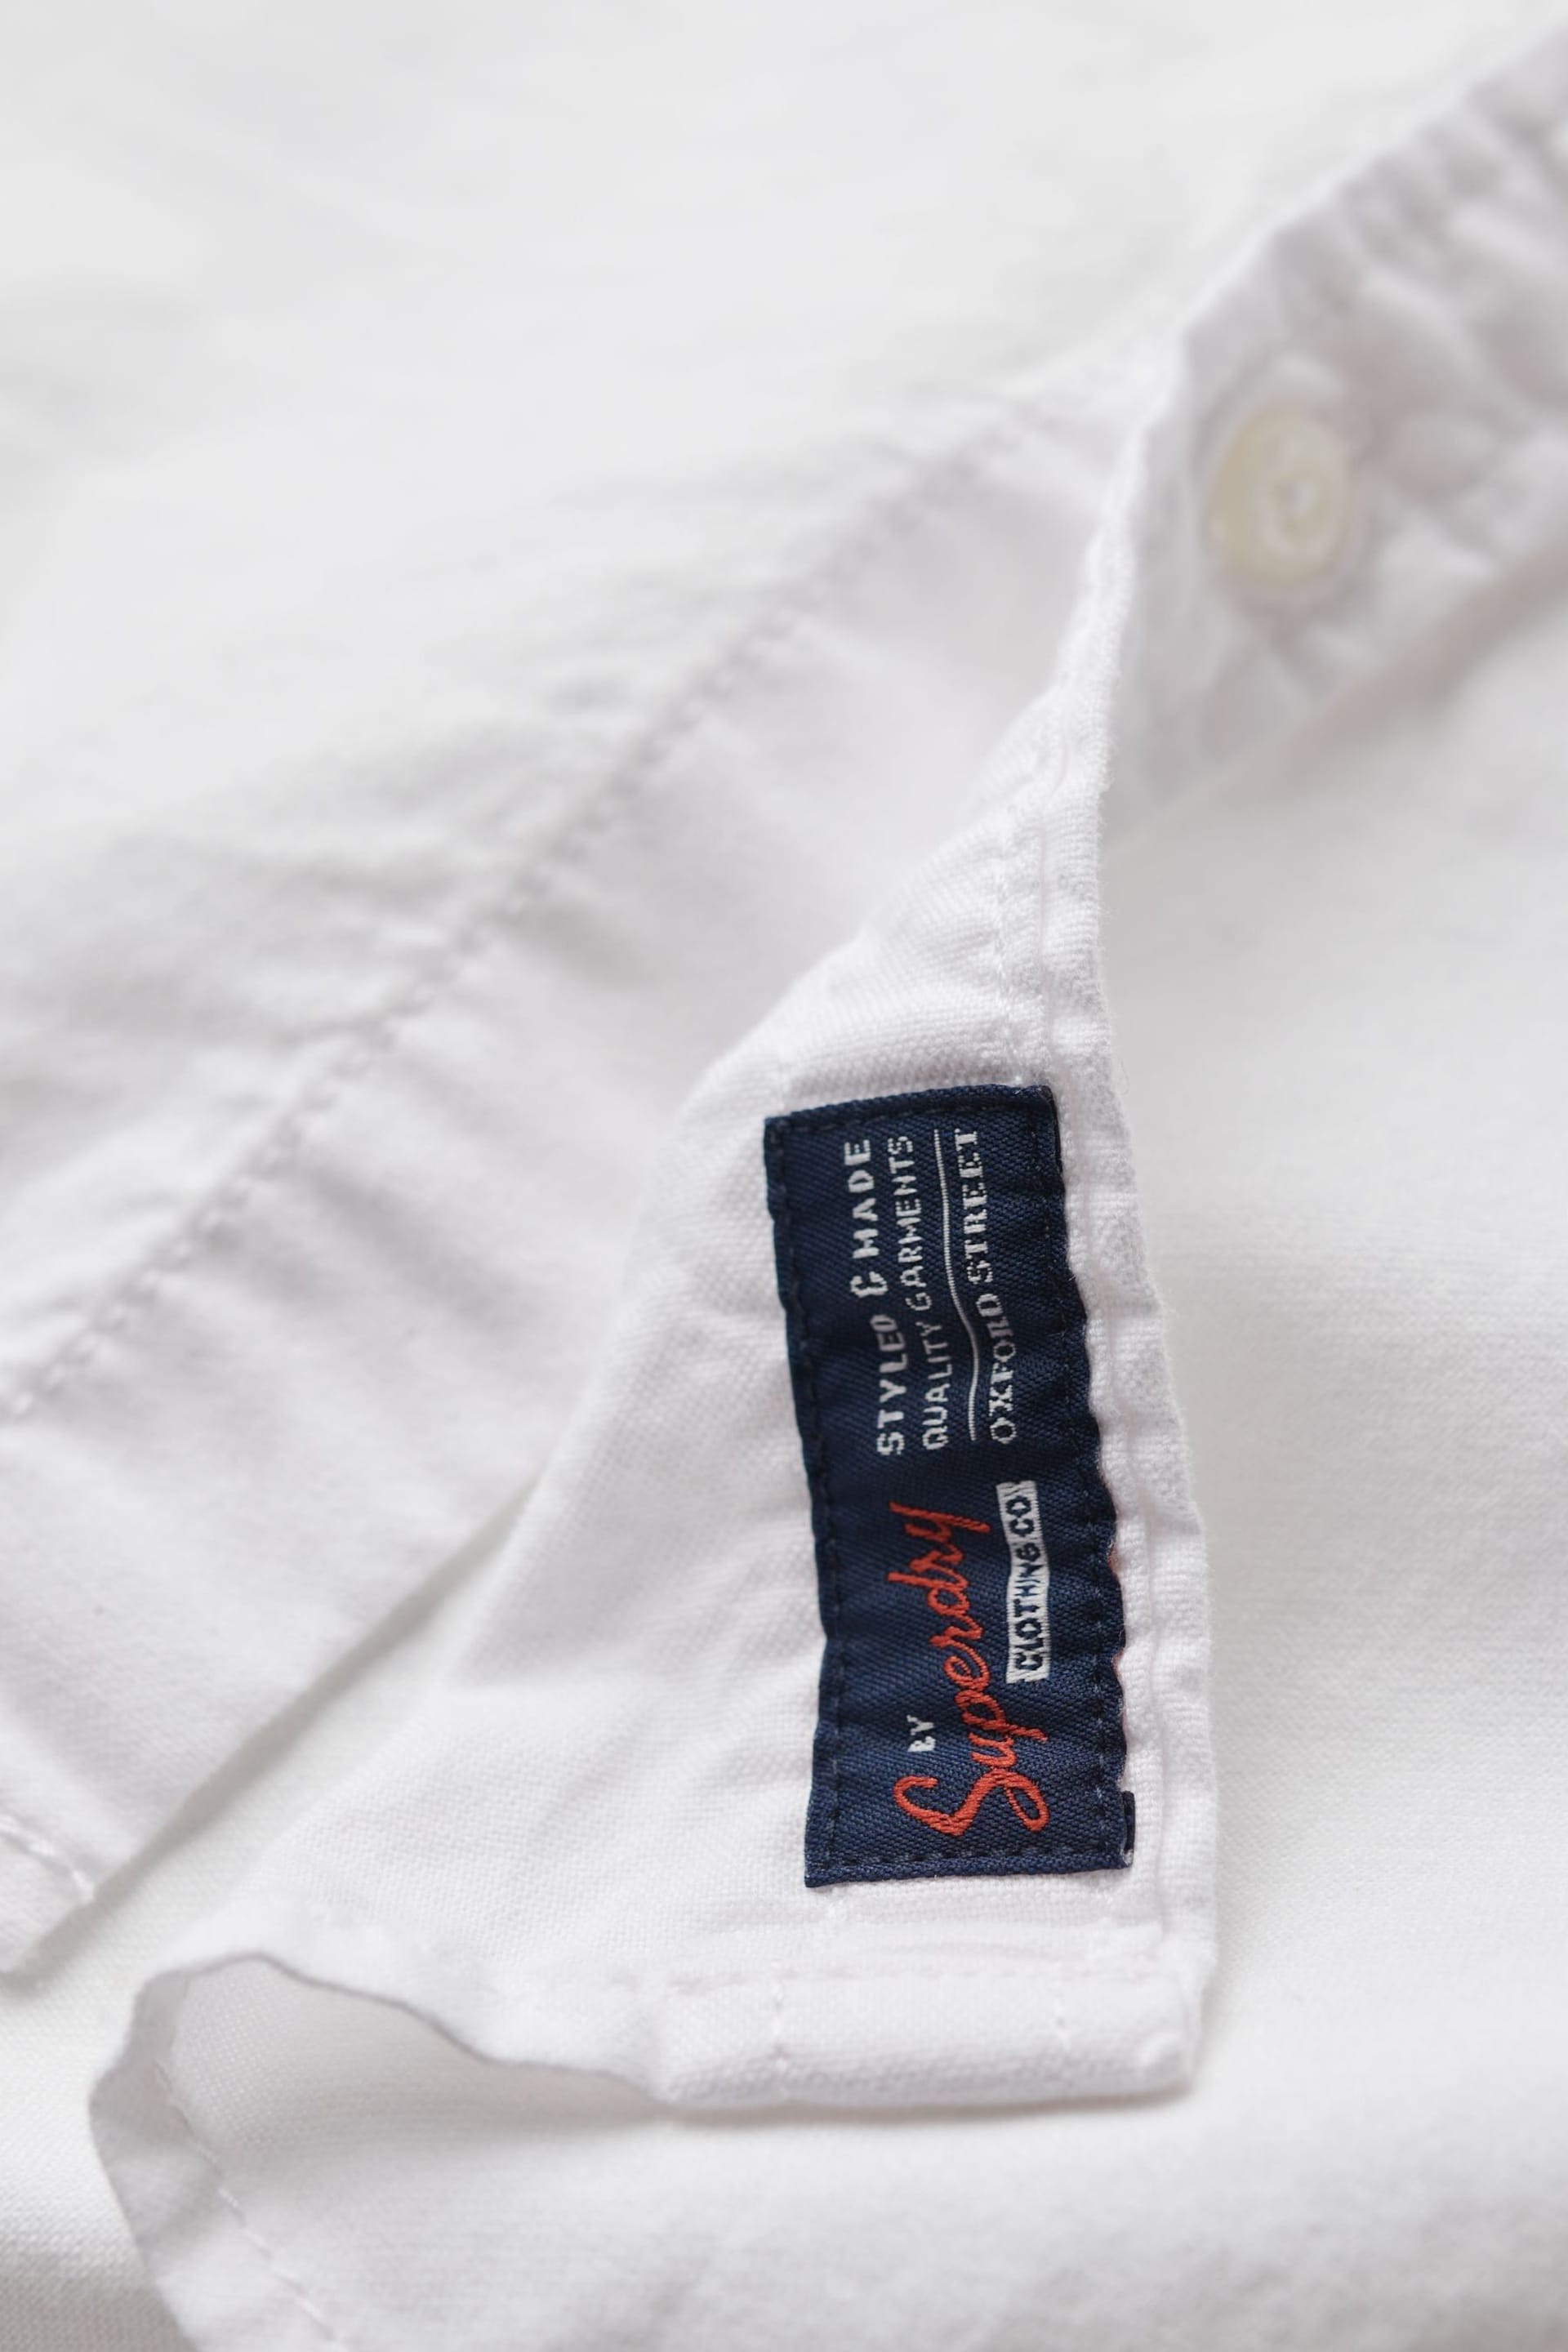 Superdry White Cotton Long Sleeved Oxford Shirt - Image 6 of 6